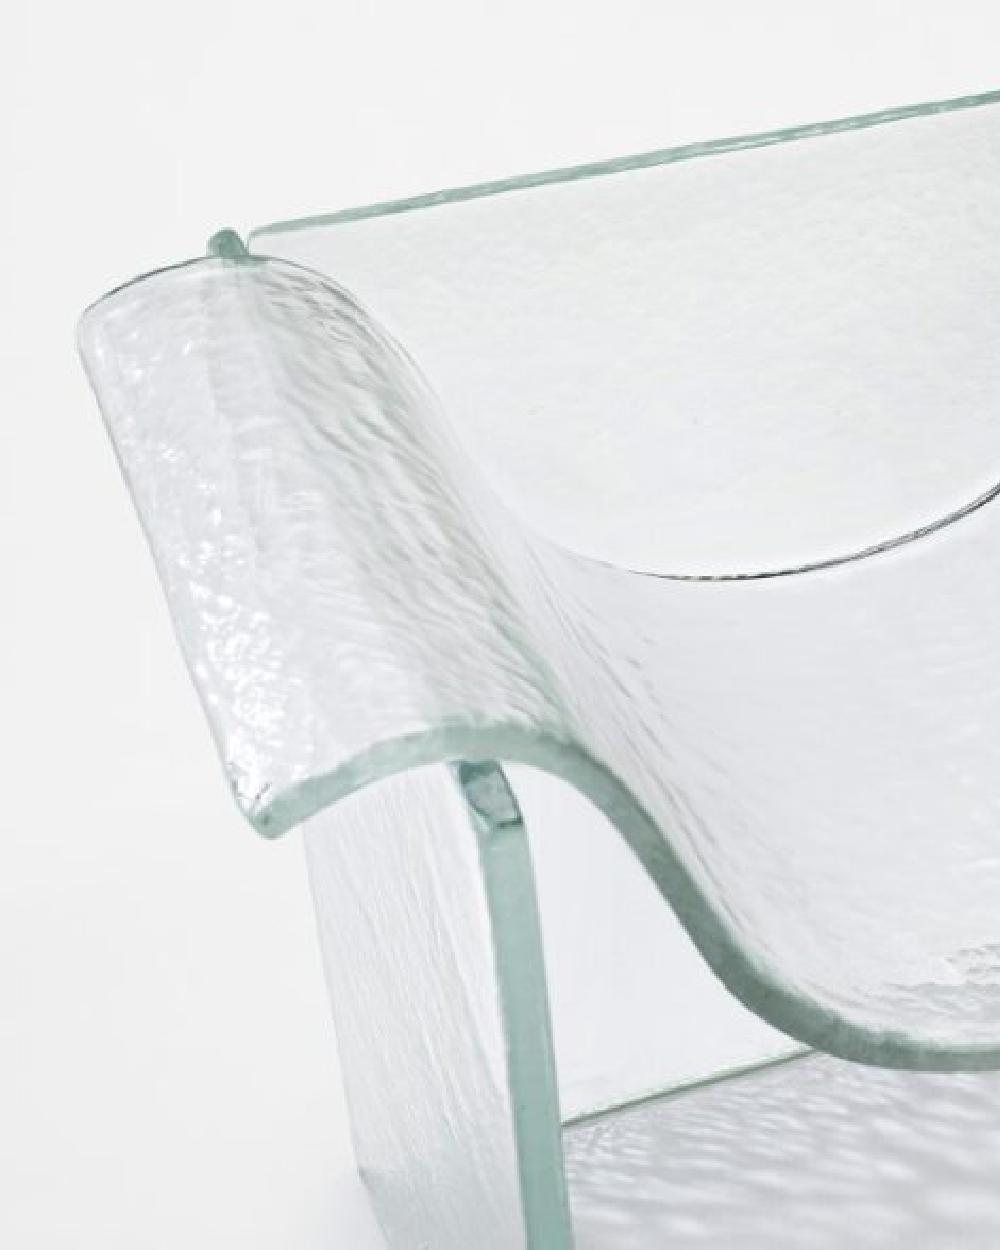 Melt is a collaboration with Japanese design studio, nendo, inspired by the flexibility of molten glass and the force of gravity. The creation of Melt was a unique and complex production. After watching the craftsmen working in WonderGlass’s